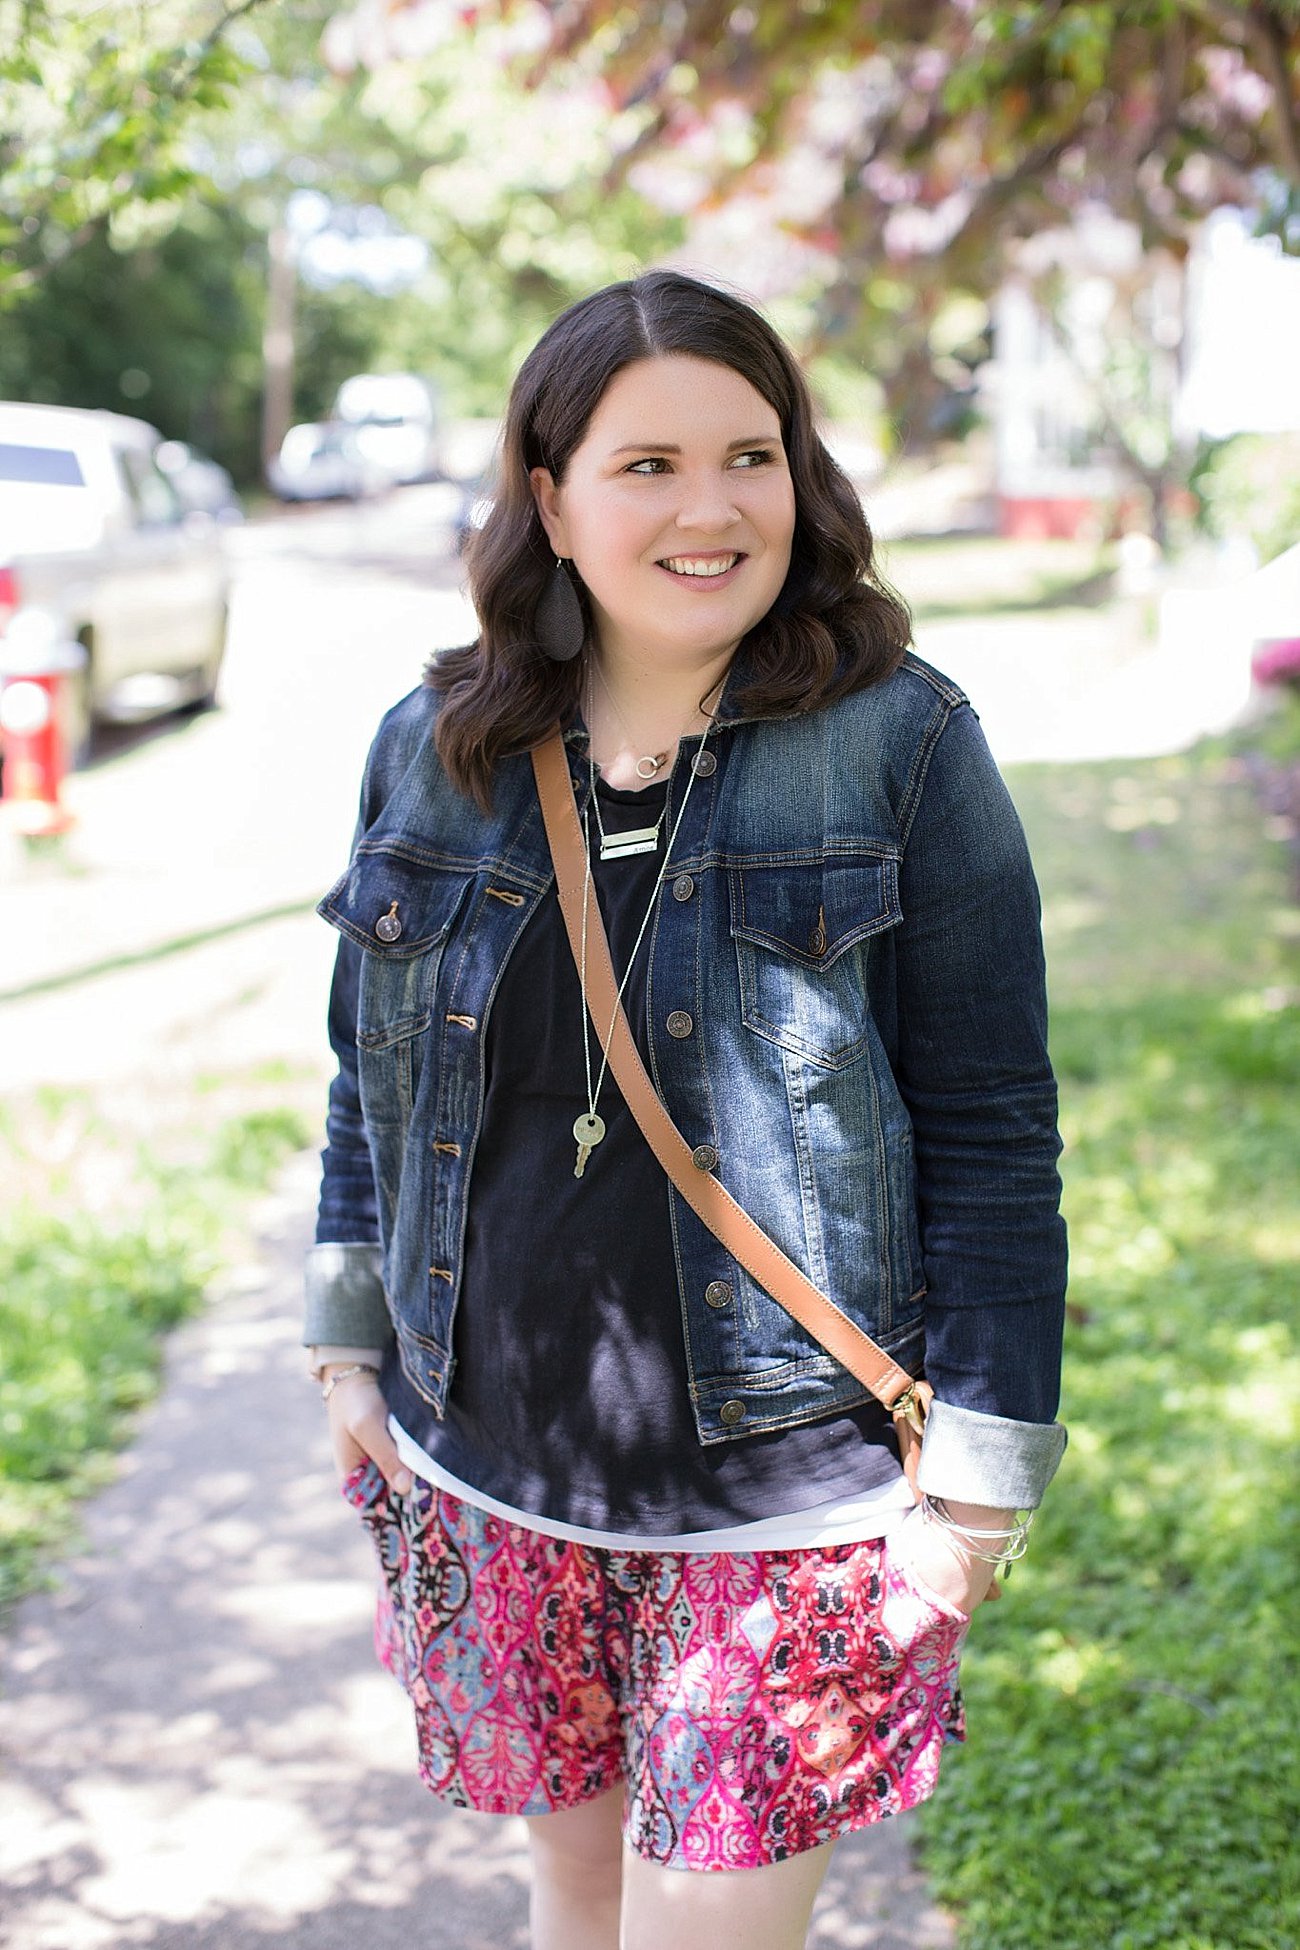 Threads 4 Thought Mona Skort, Stitch Fix Just USA Denim Jacket, Sudara Goods Globetrotter Tee, Sseko Designs Foldover Crossbody Clutch, The Root Collective shoes | Ethical Fashion & Style Blogger (9)